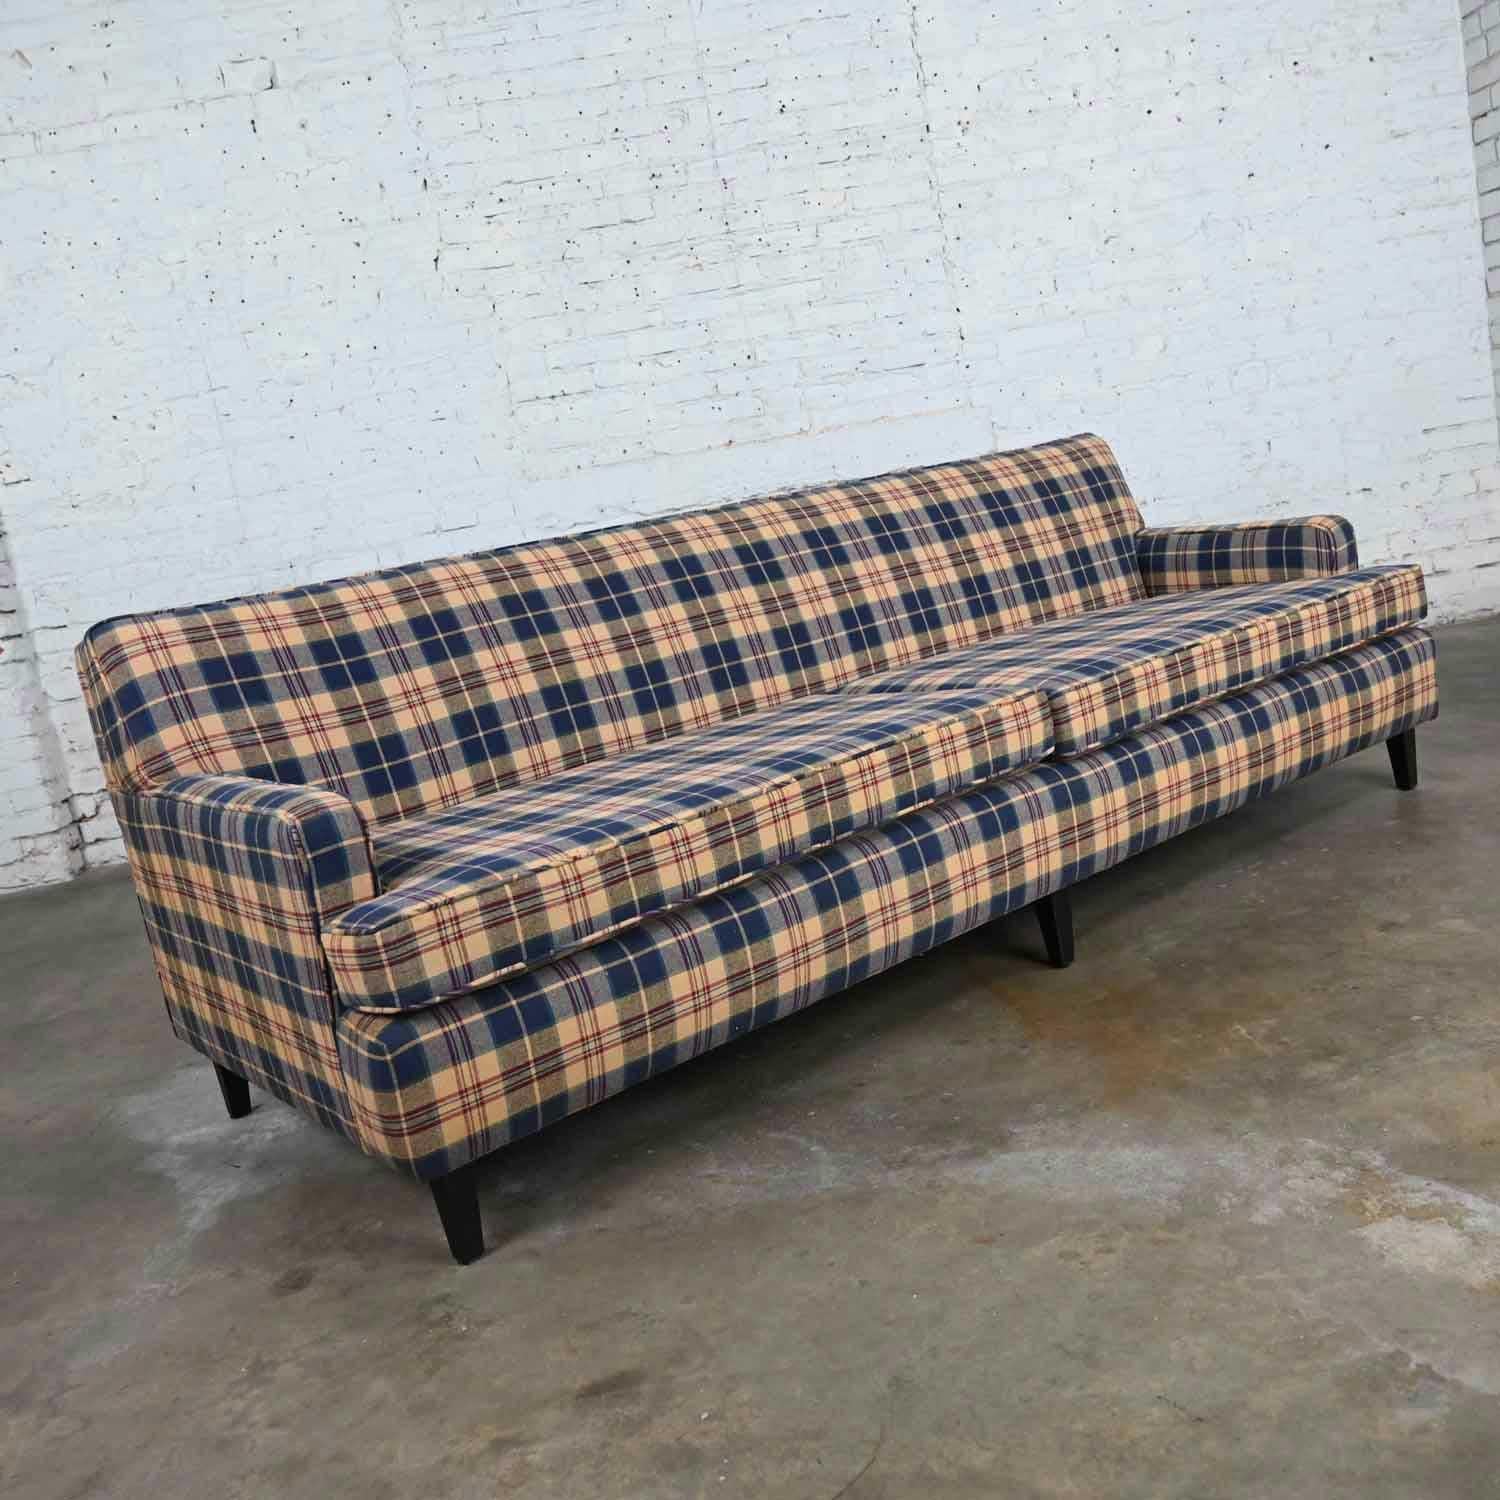 Awesome vintage blue, khaki, maroon, and black plaid Lawson style tight back sofa with square tapered black painted legs. Beautiful condition, keeping in mind that this is vintage and not new so will have signs of use and wear. The legs have a fresh